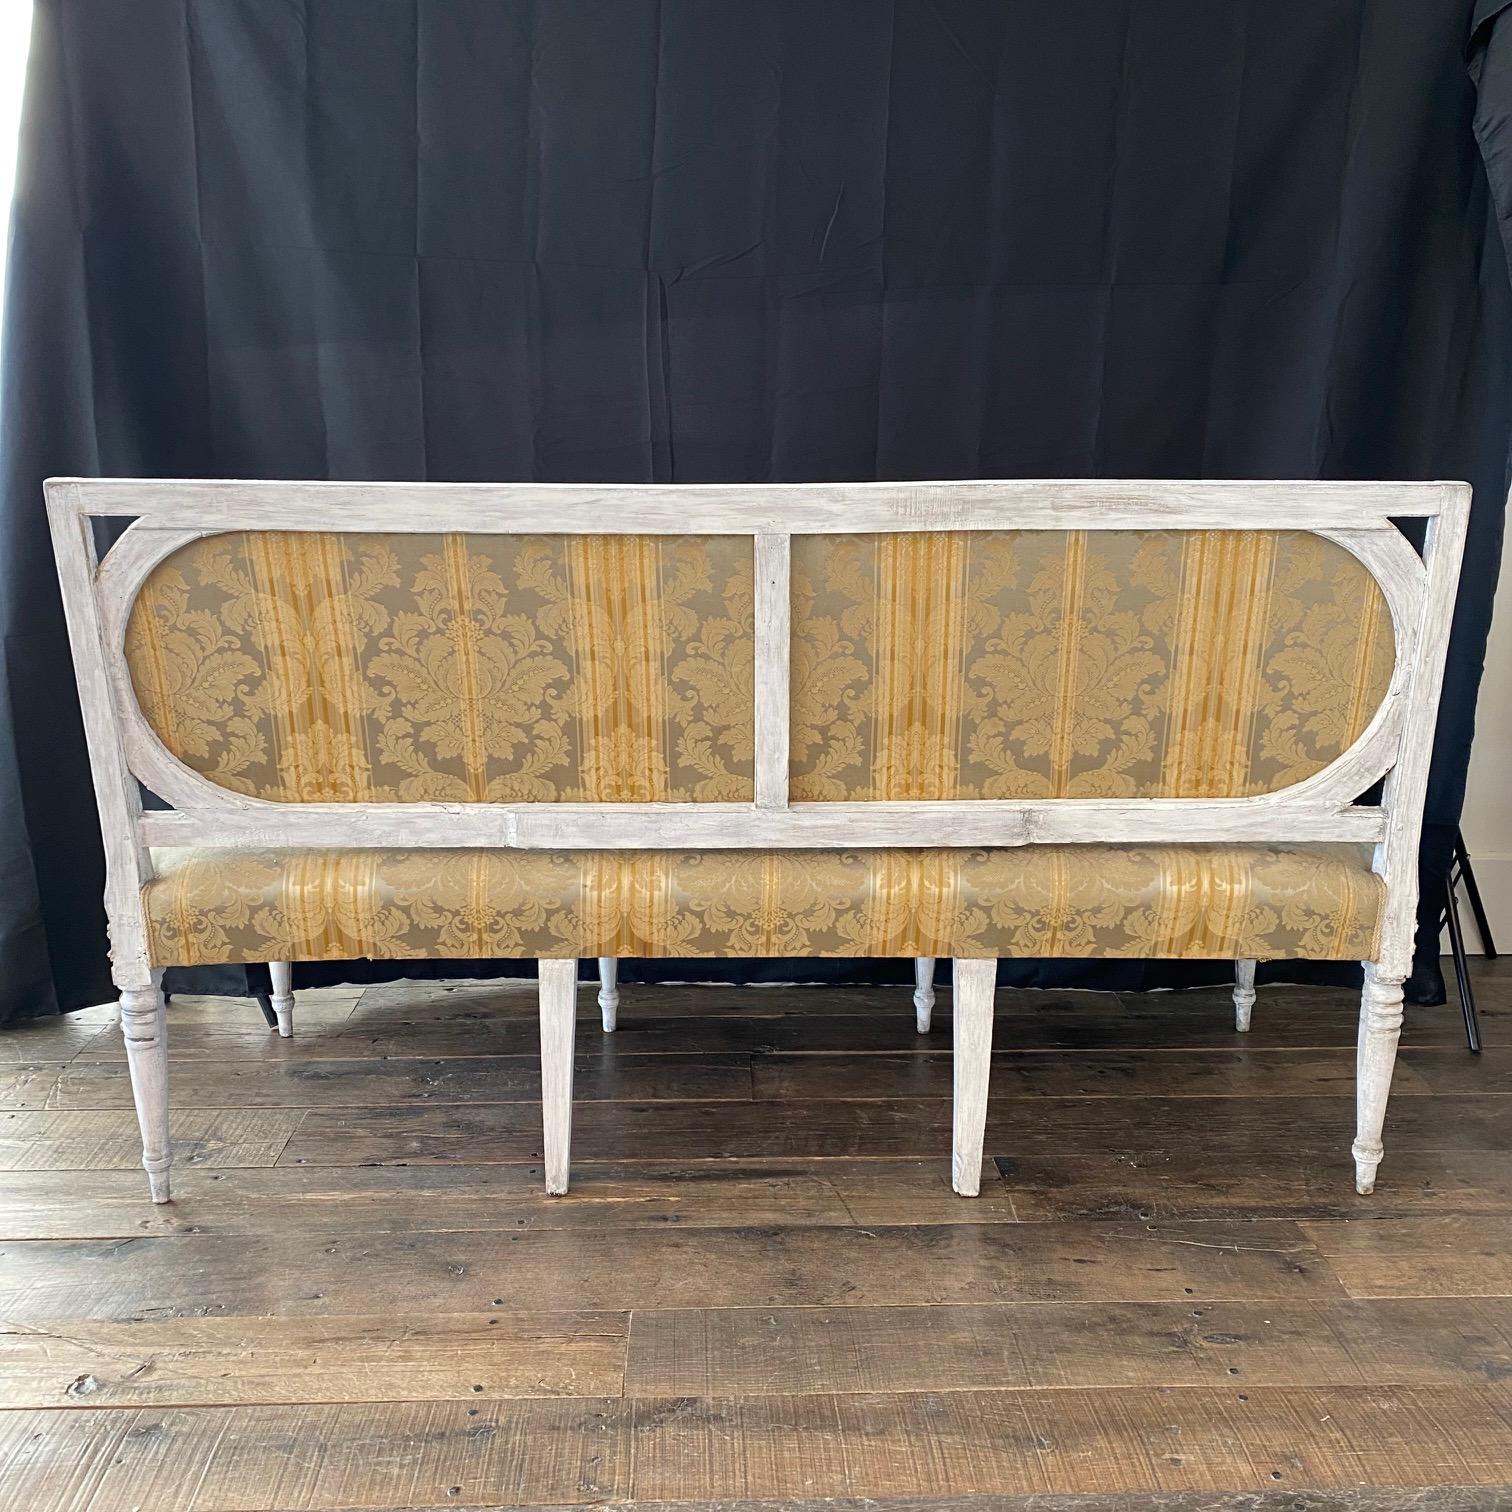 Elegant and classic 18th century authentic Italian Neoclassical sofa that's part of a salon set with two armchairs or fauteuils, selling separately.  Upholstered in a stunning neutral raw-silk with original paint. In wonderful shape for its age (a